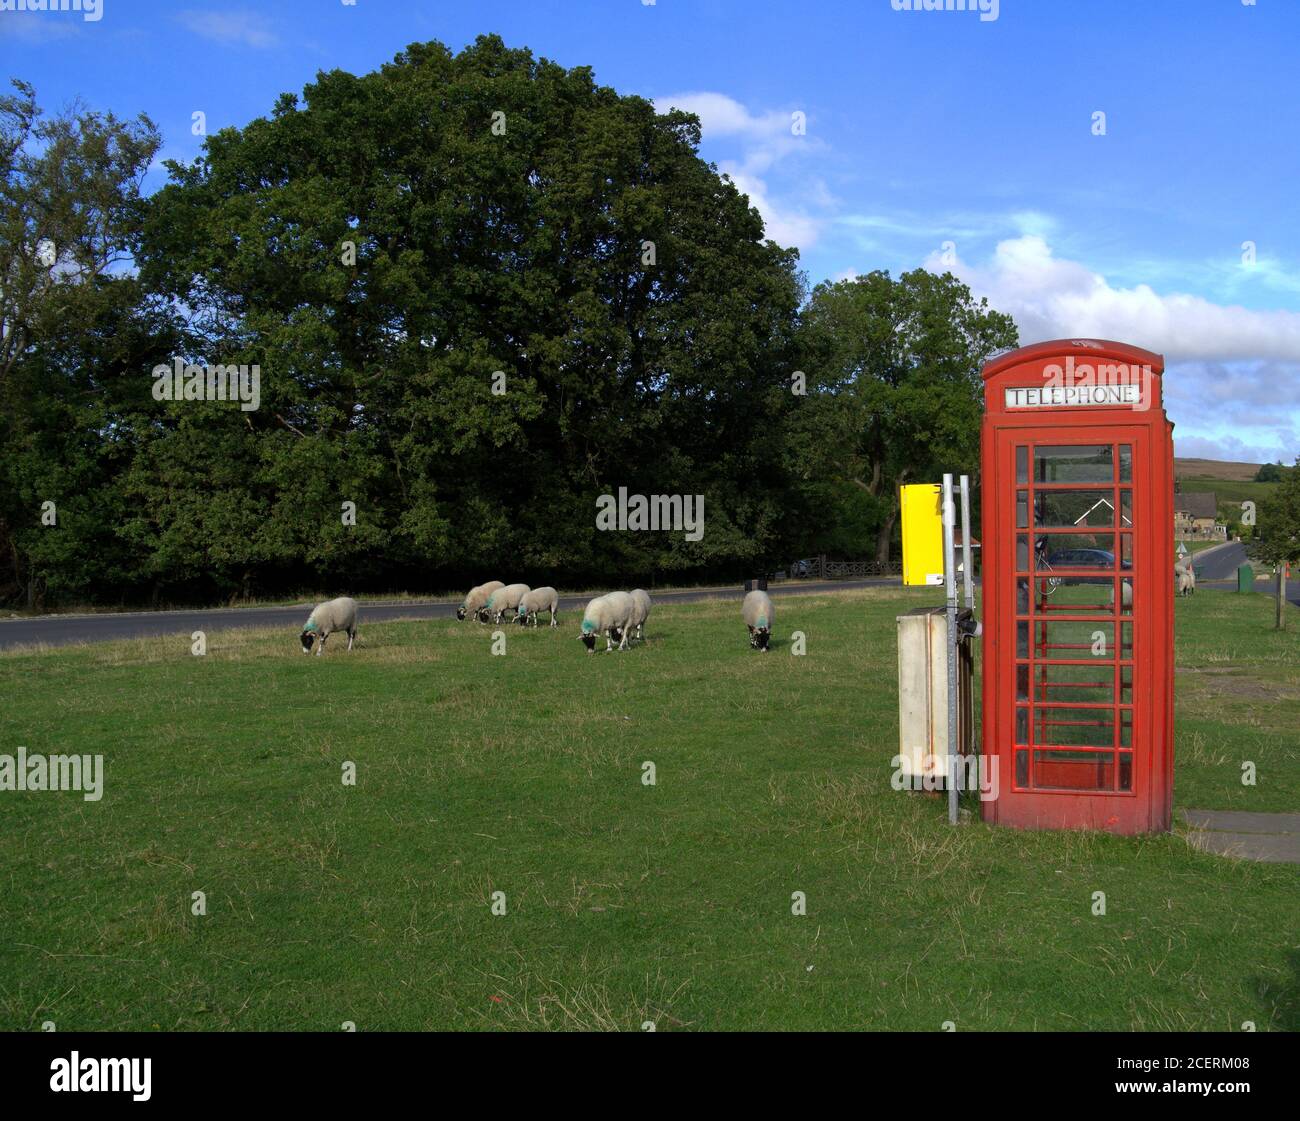 Goathland, North Yorkshire, United Kingdom - August 27 2014: A flock of sheep grazing in the village. Stock Photo